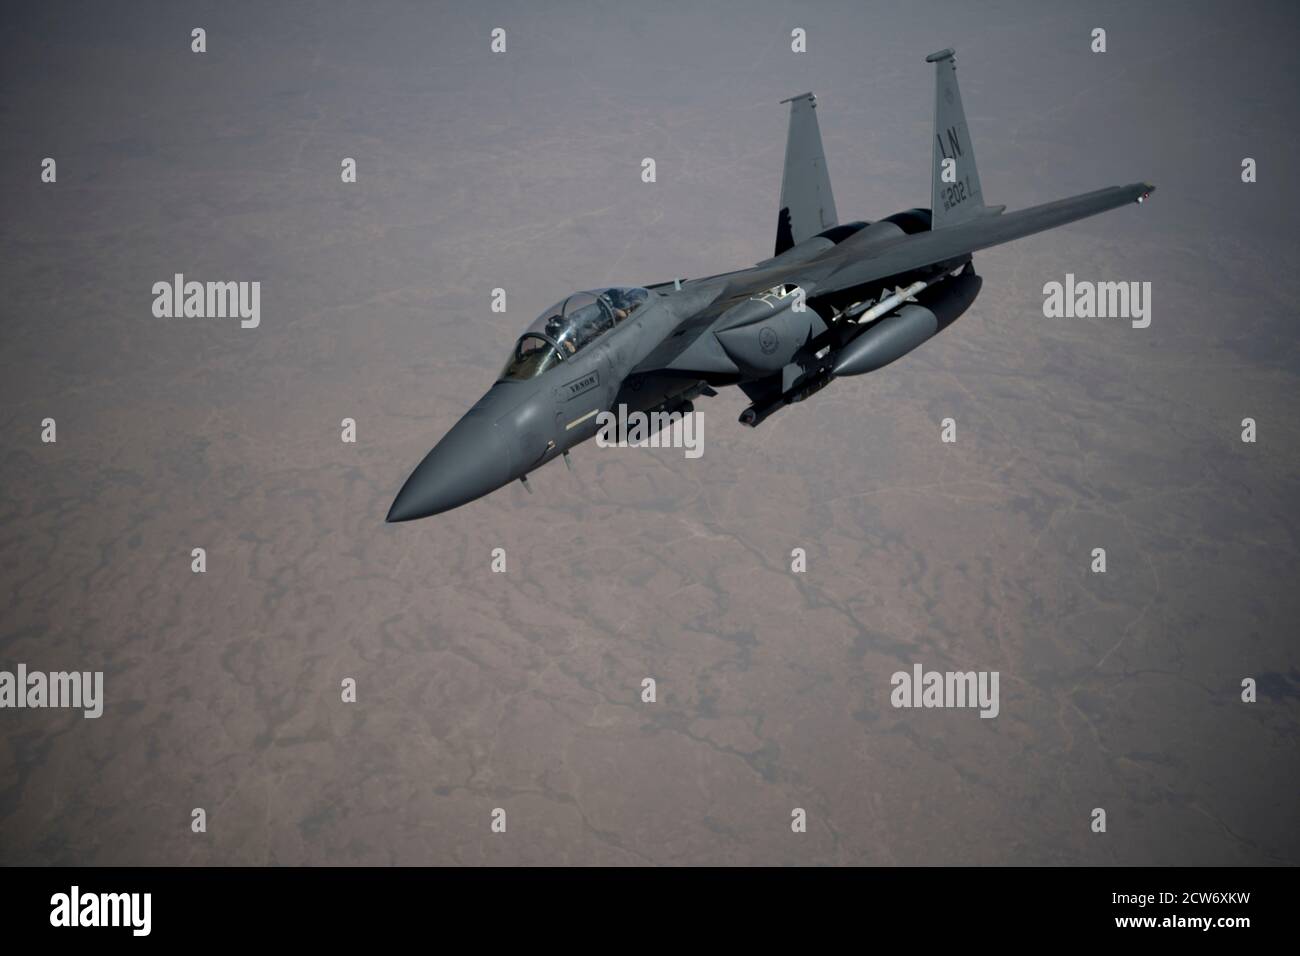 A U.S. Air Force F-15E Strike Eagle flies over the U.S. Central Command area of responsibility, Sept. 15th, 2020. The F-15E Strike Eagle is a dual-role fighter designed to perform air-to-air and air-to-ground missions, demonstrating U.S. Air Force Central Commands' posture to compete, deter and win against state and non-state actors. (U.S. Air Force photo by Staff Sgt. Jason Allred) Stock Photo